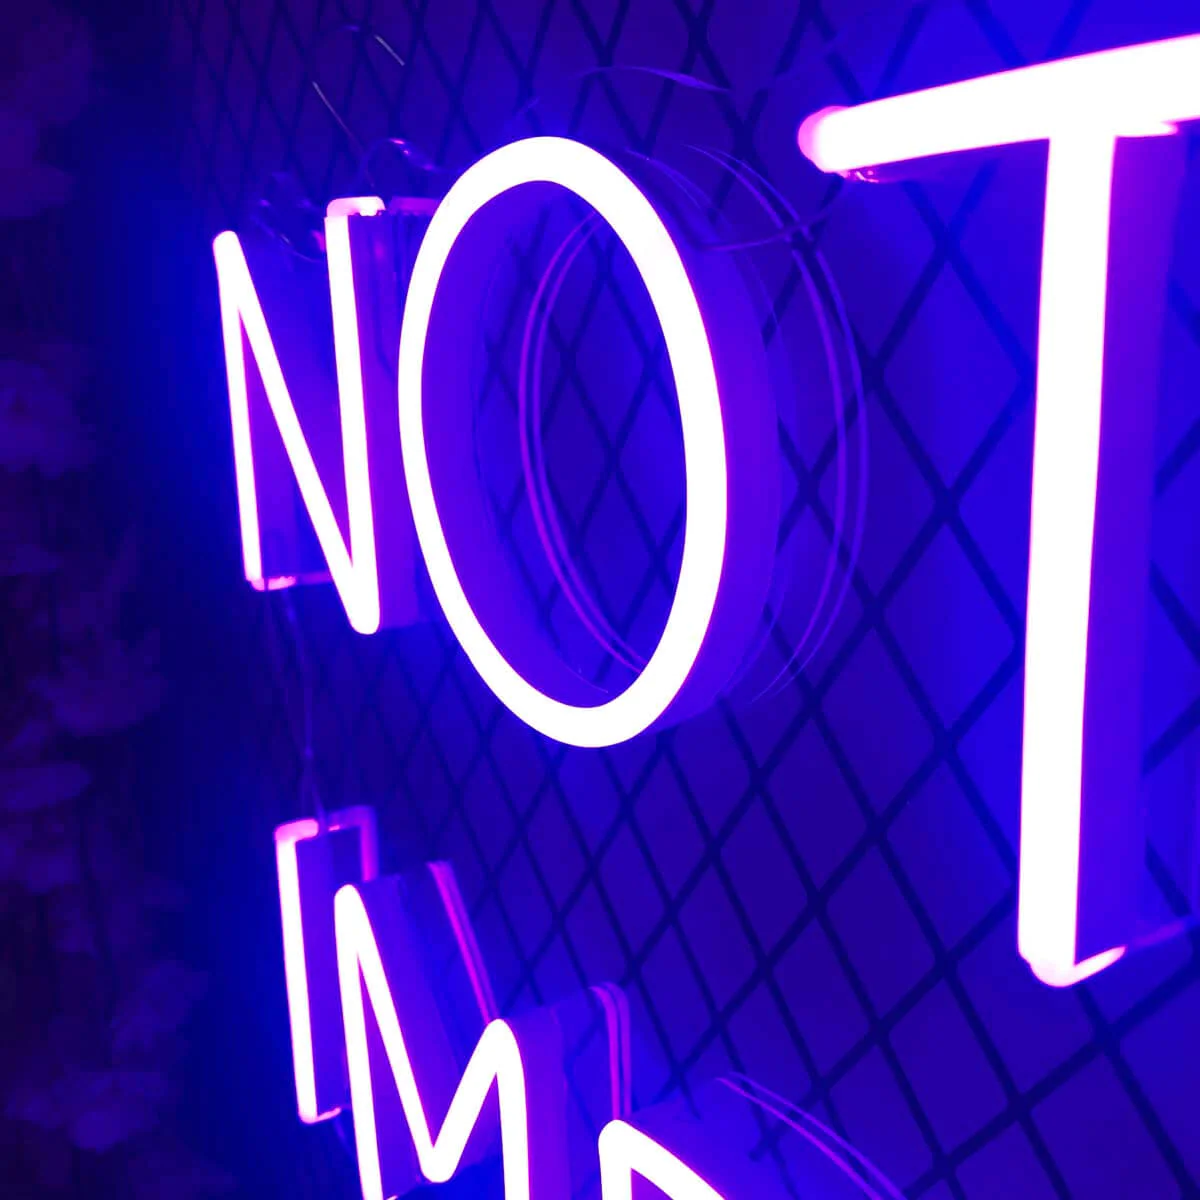 NOTHING IS IMPOSSIBLE Neon Sign